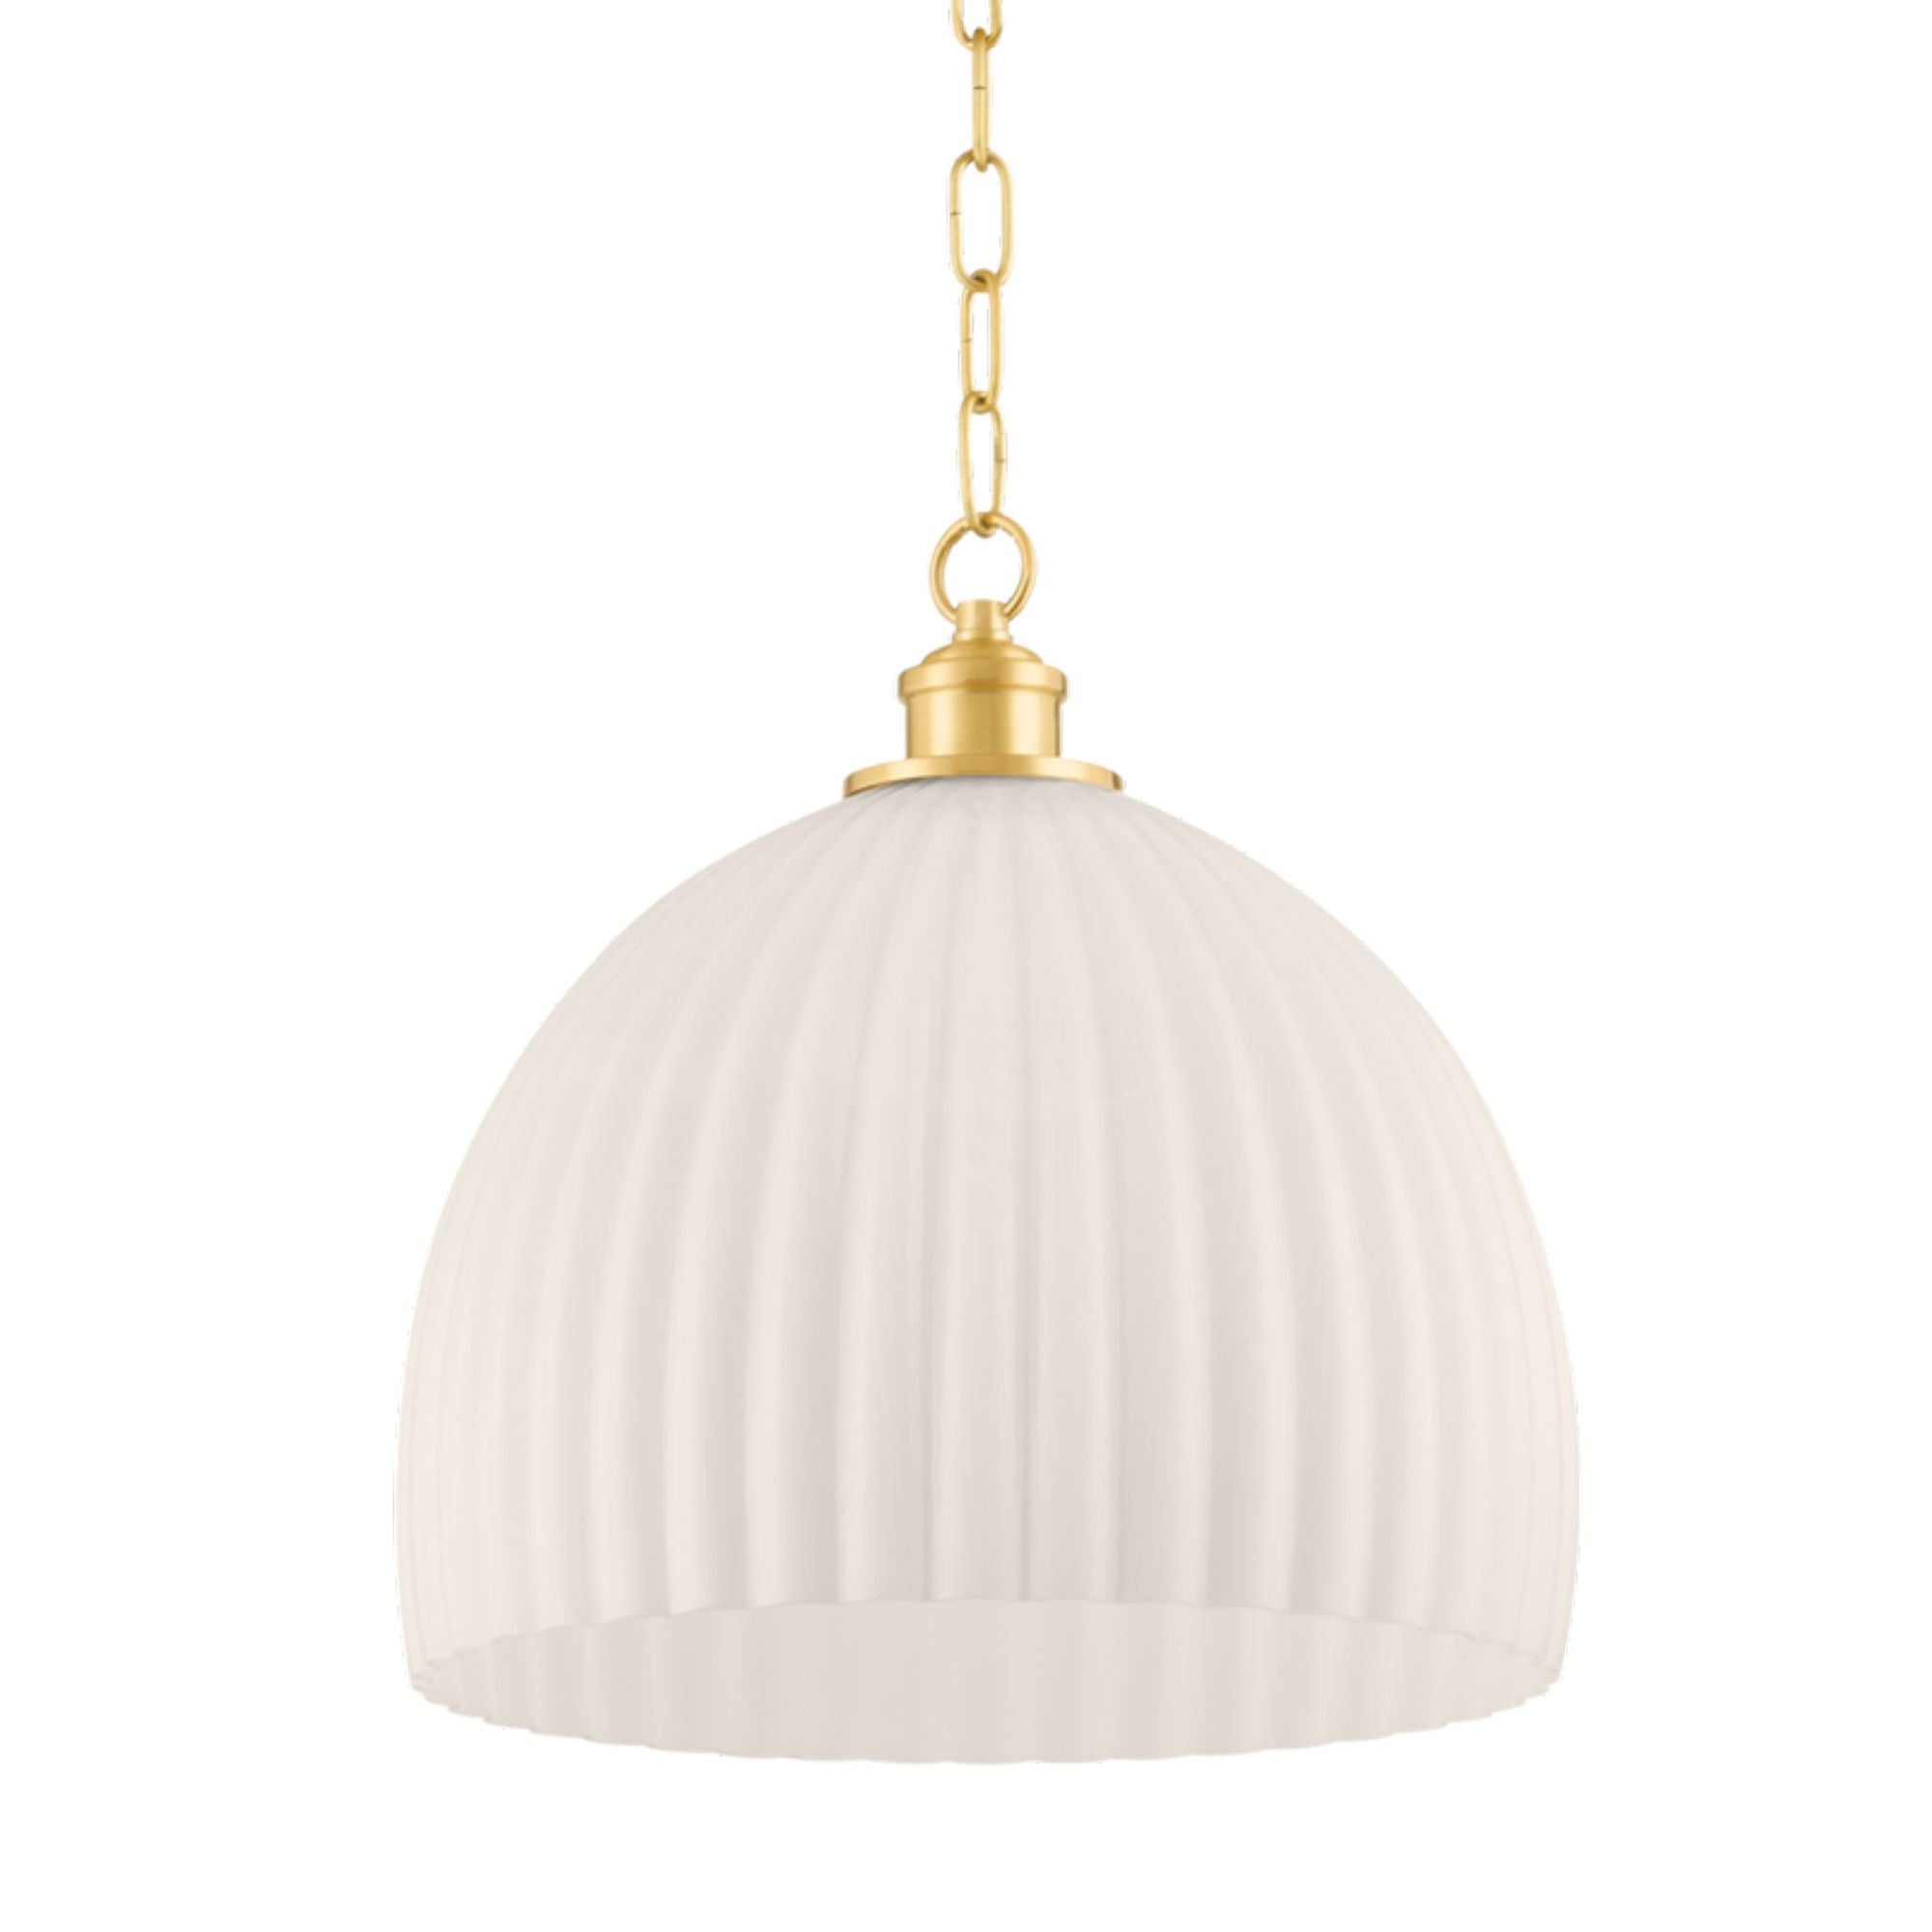 Hillary 1-Light Pendant in Aged Brass by Zio & Sons